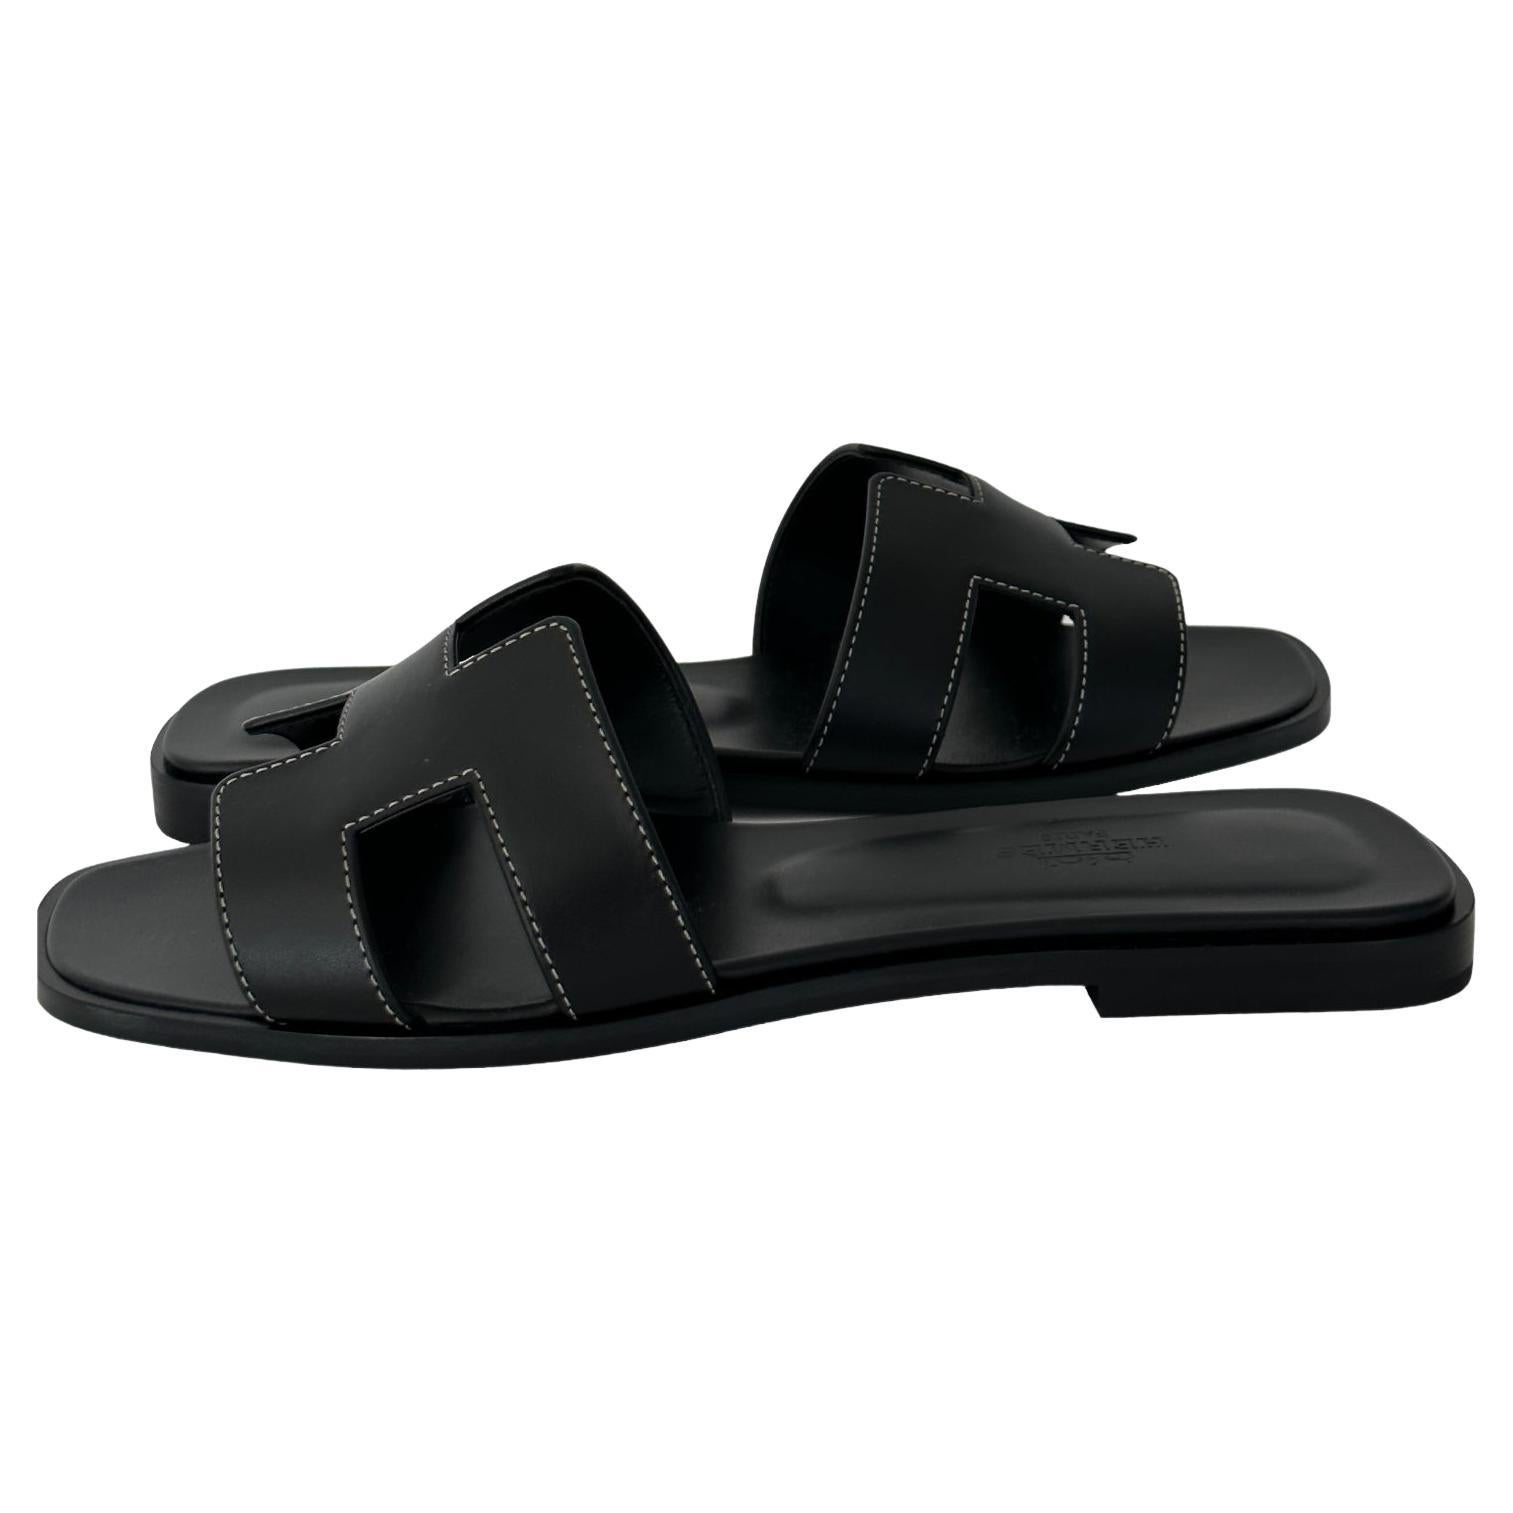 The  Oran Sandal 
Hermes Oran is a style of sandal produced by the luxury fashion brand Hermes. The sandal features a simple, minimalist design, with a leather upper and a flat sole. The Oran is available in a range of colors and materials, and is